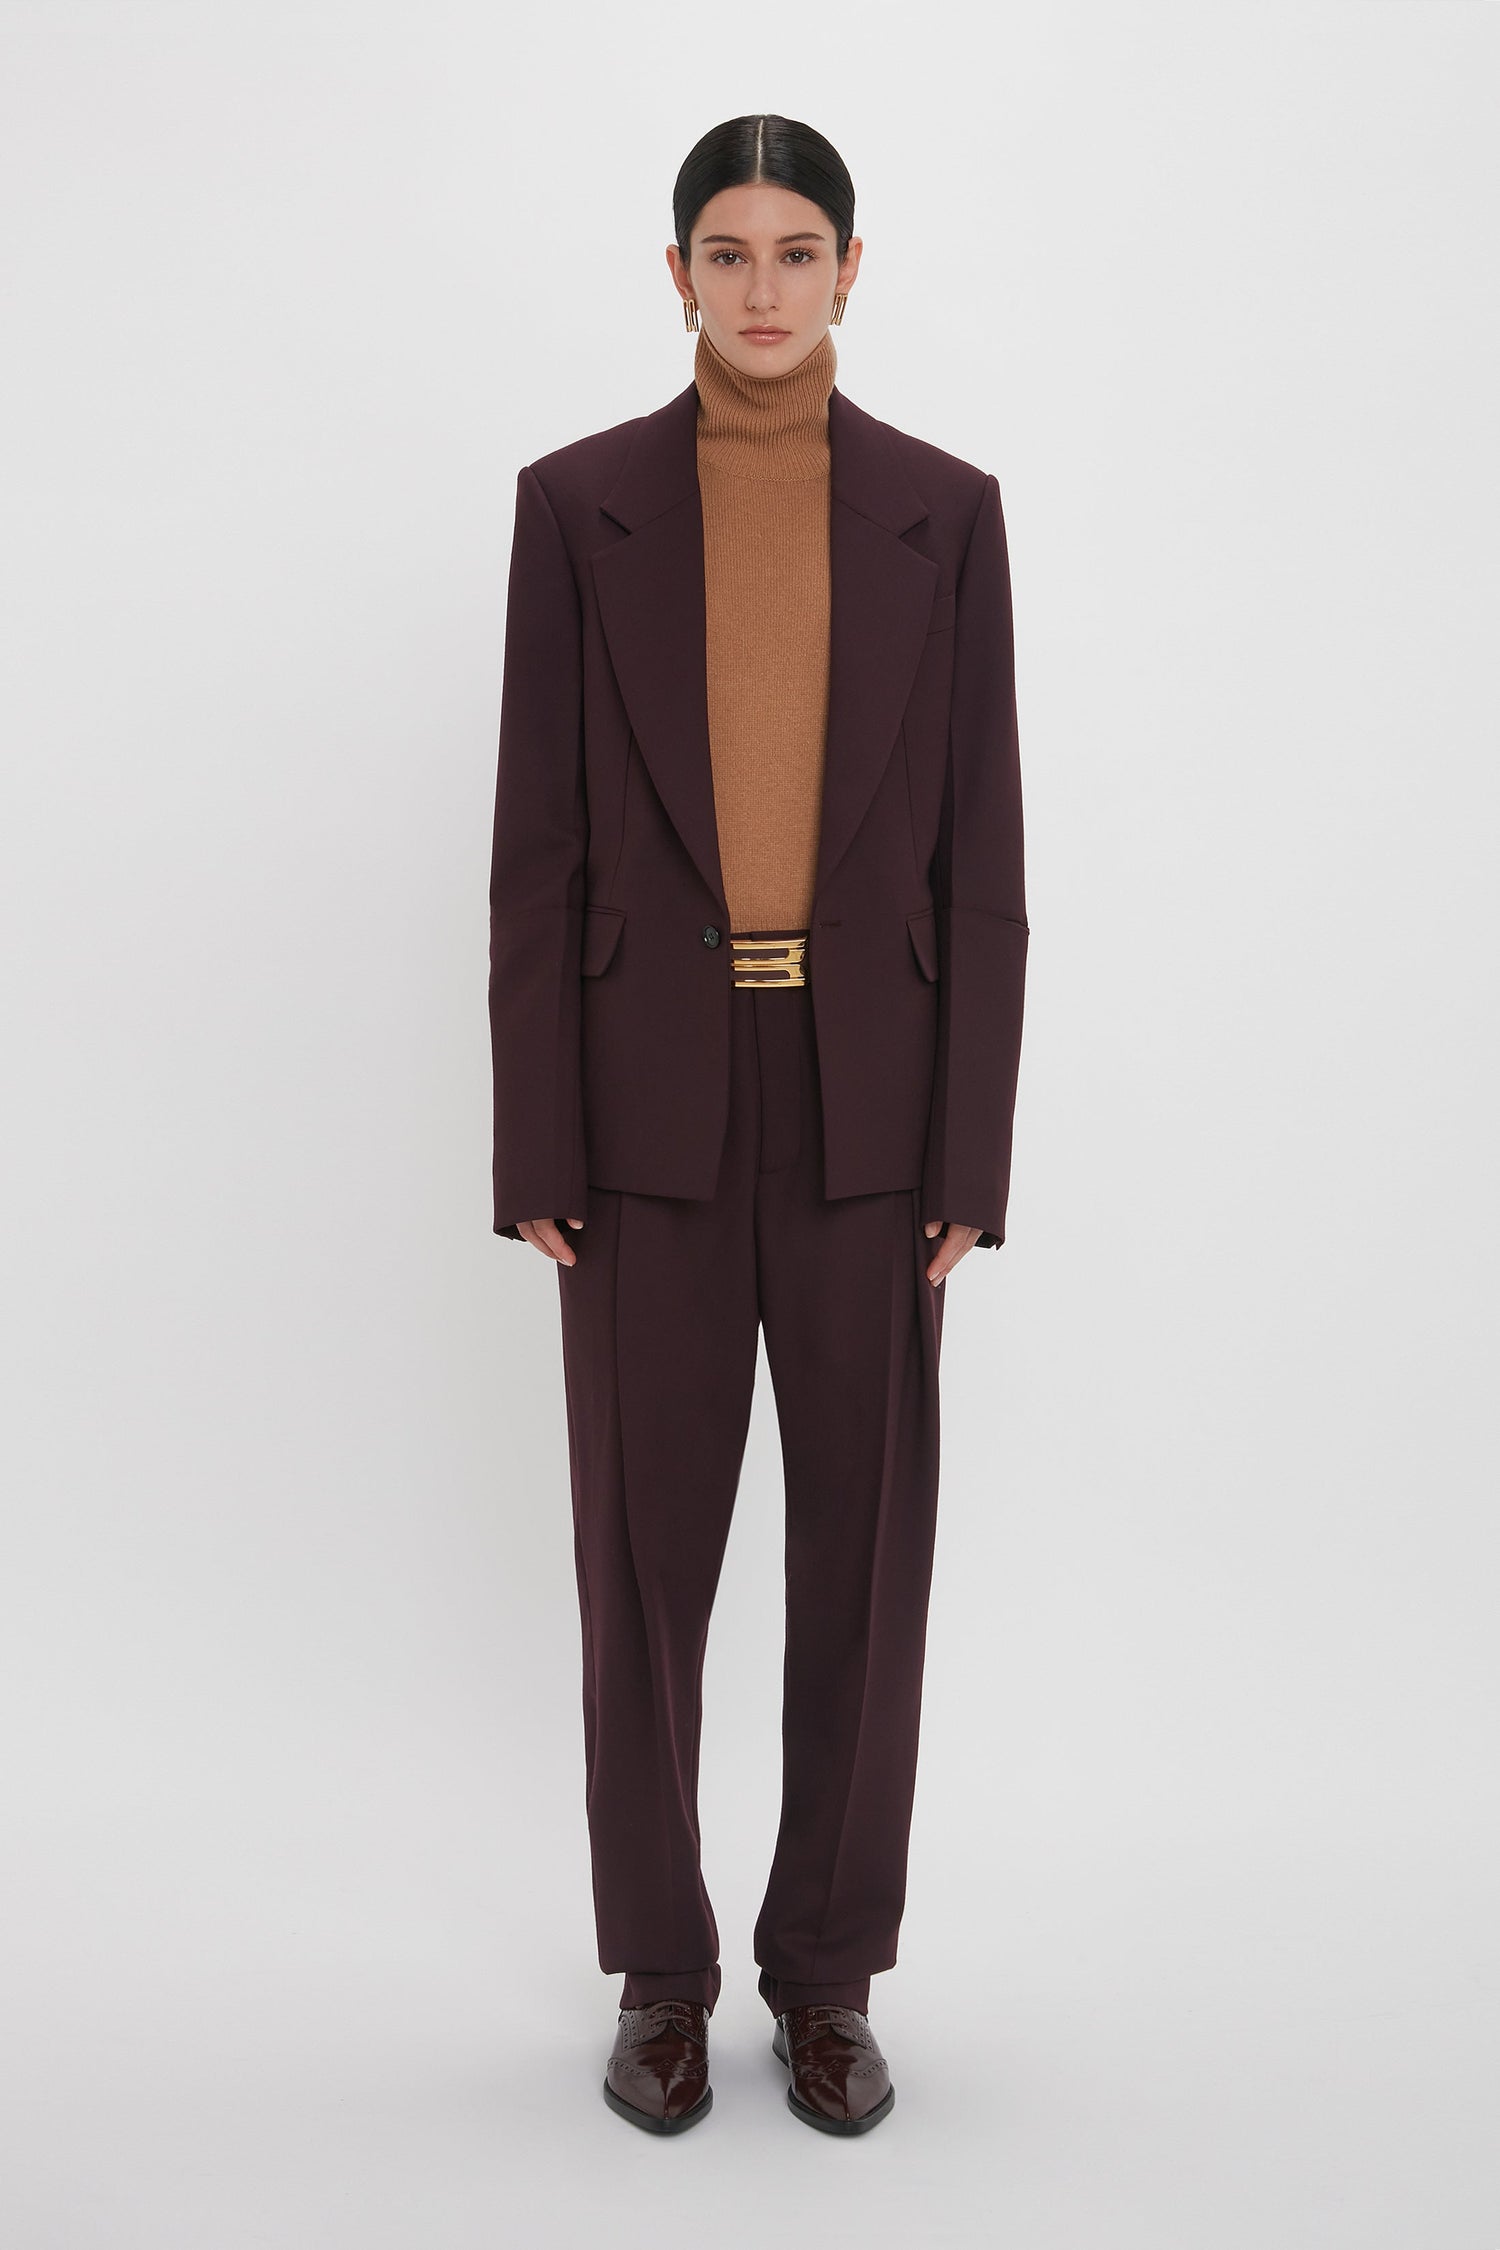 A person stands against a white background wearing a Sleeve Detail Patch Pocket Jacket in Deep Mahogany by Victoria Beckham, a brown turtleneck sweater, and dark shoes.